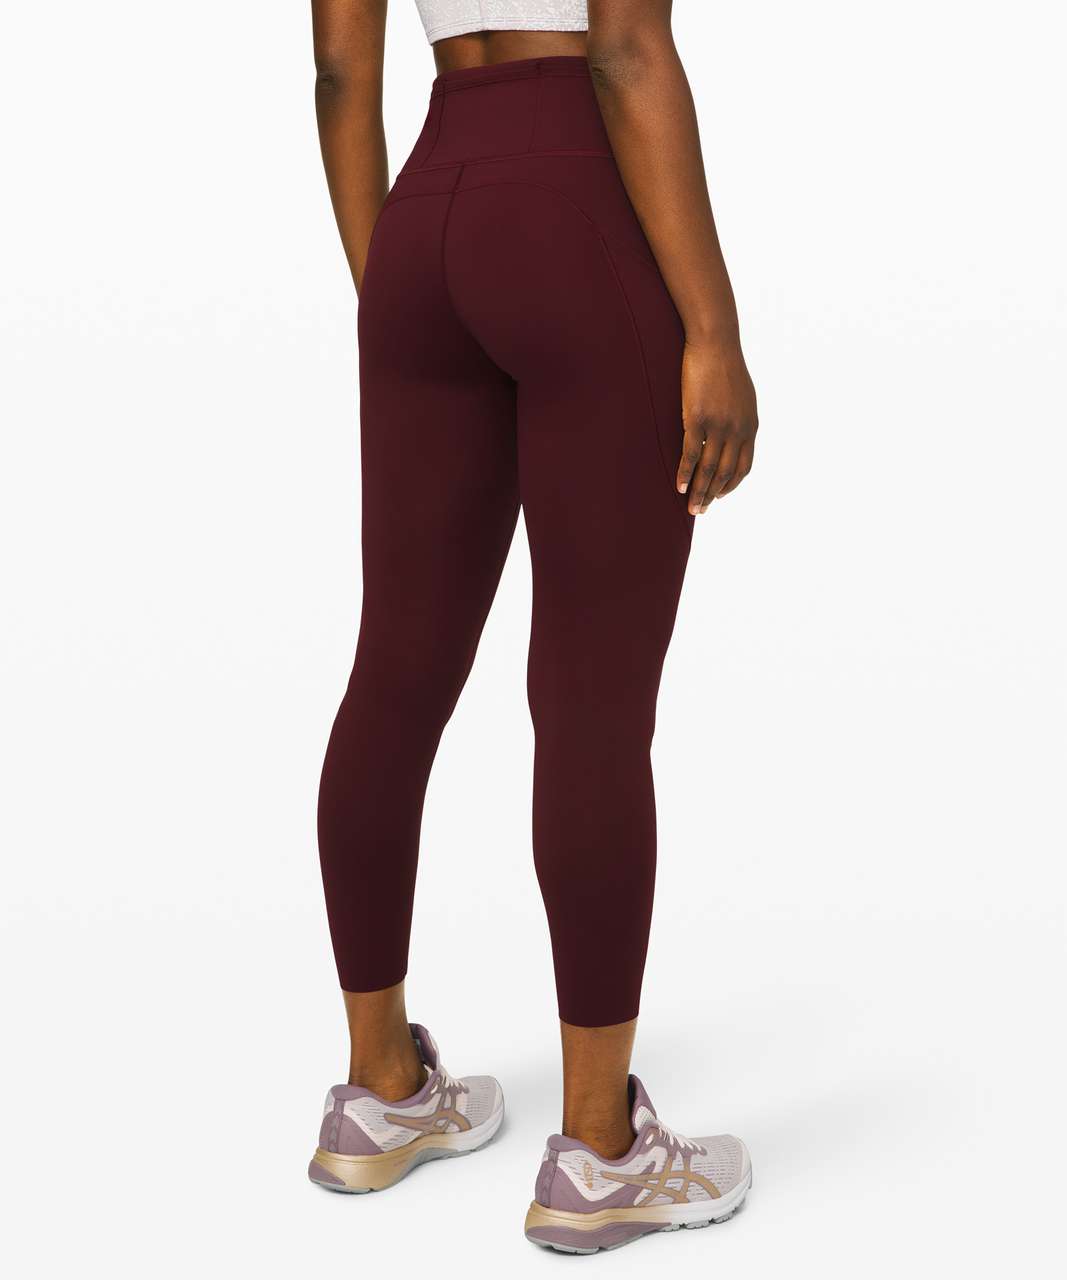 Lululemon Fast and Free Tight II 25" *Non-Reflective Nulux - Garnet